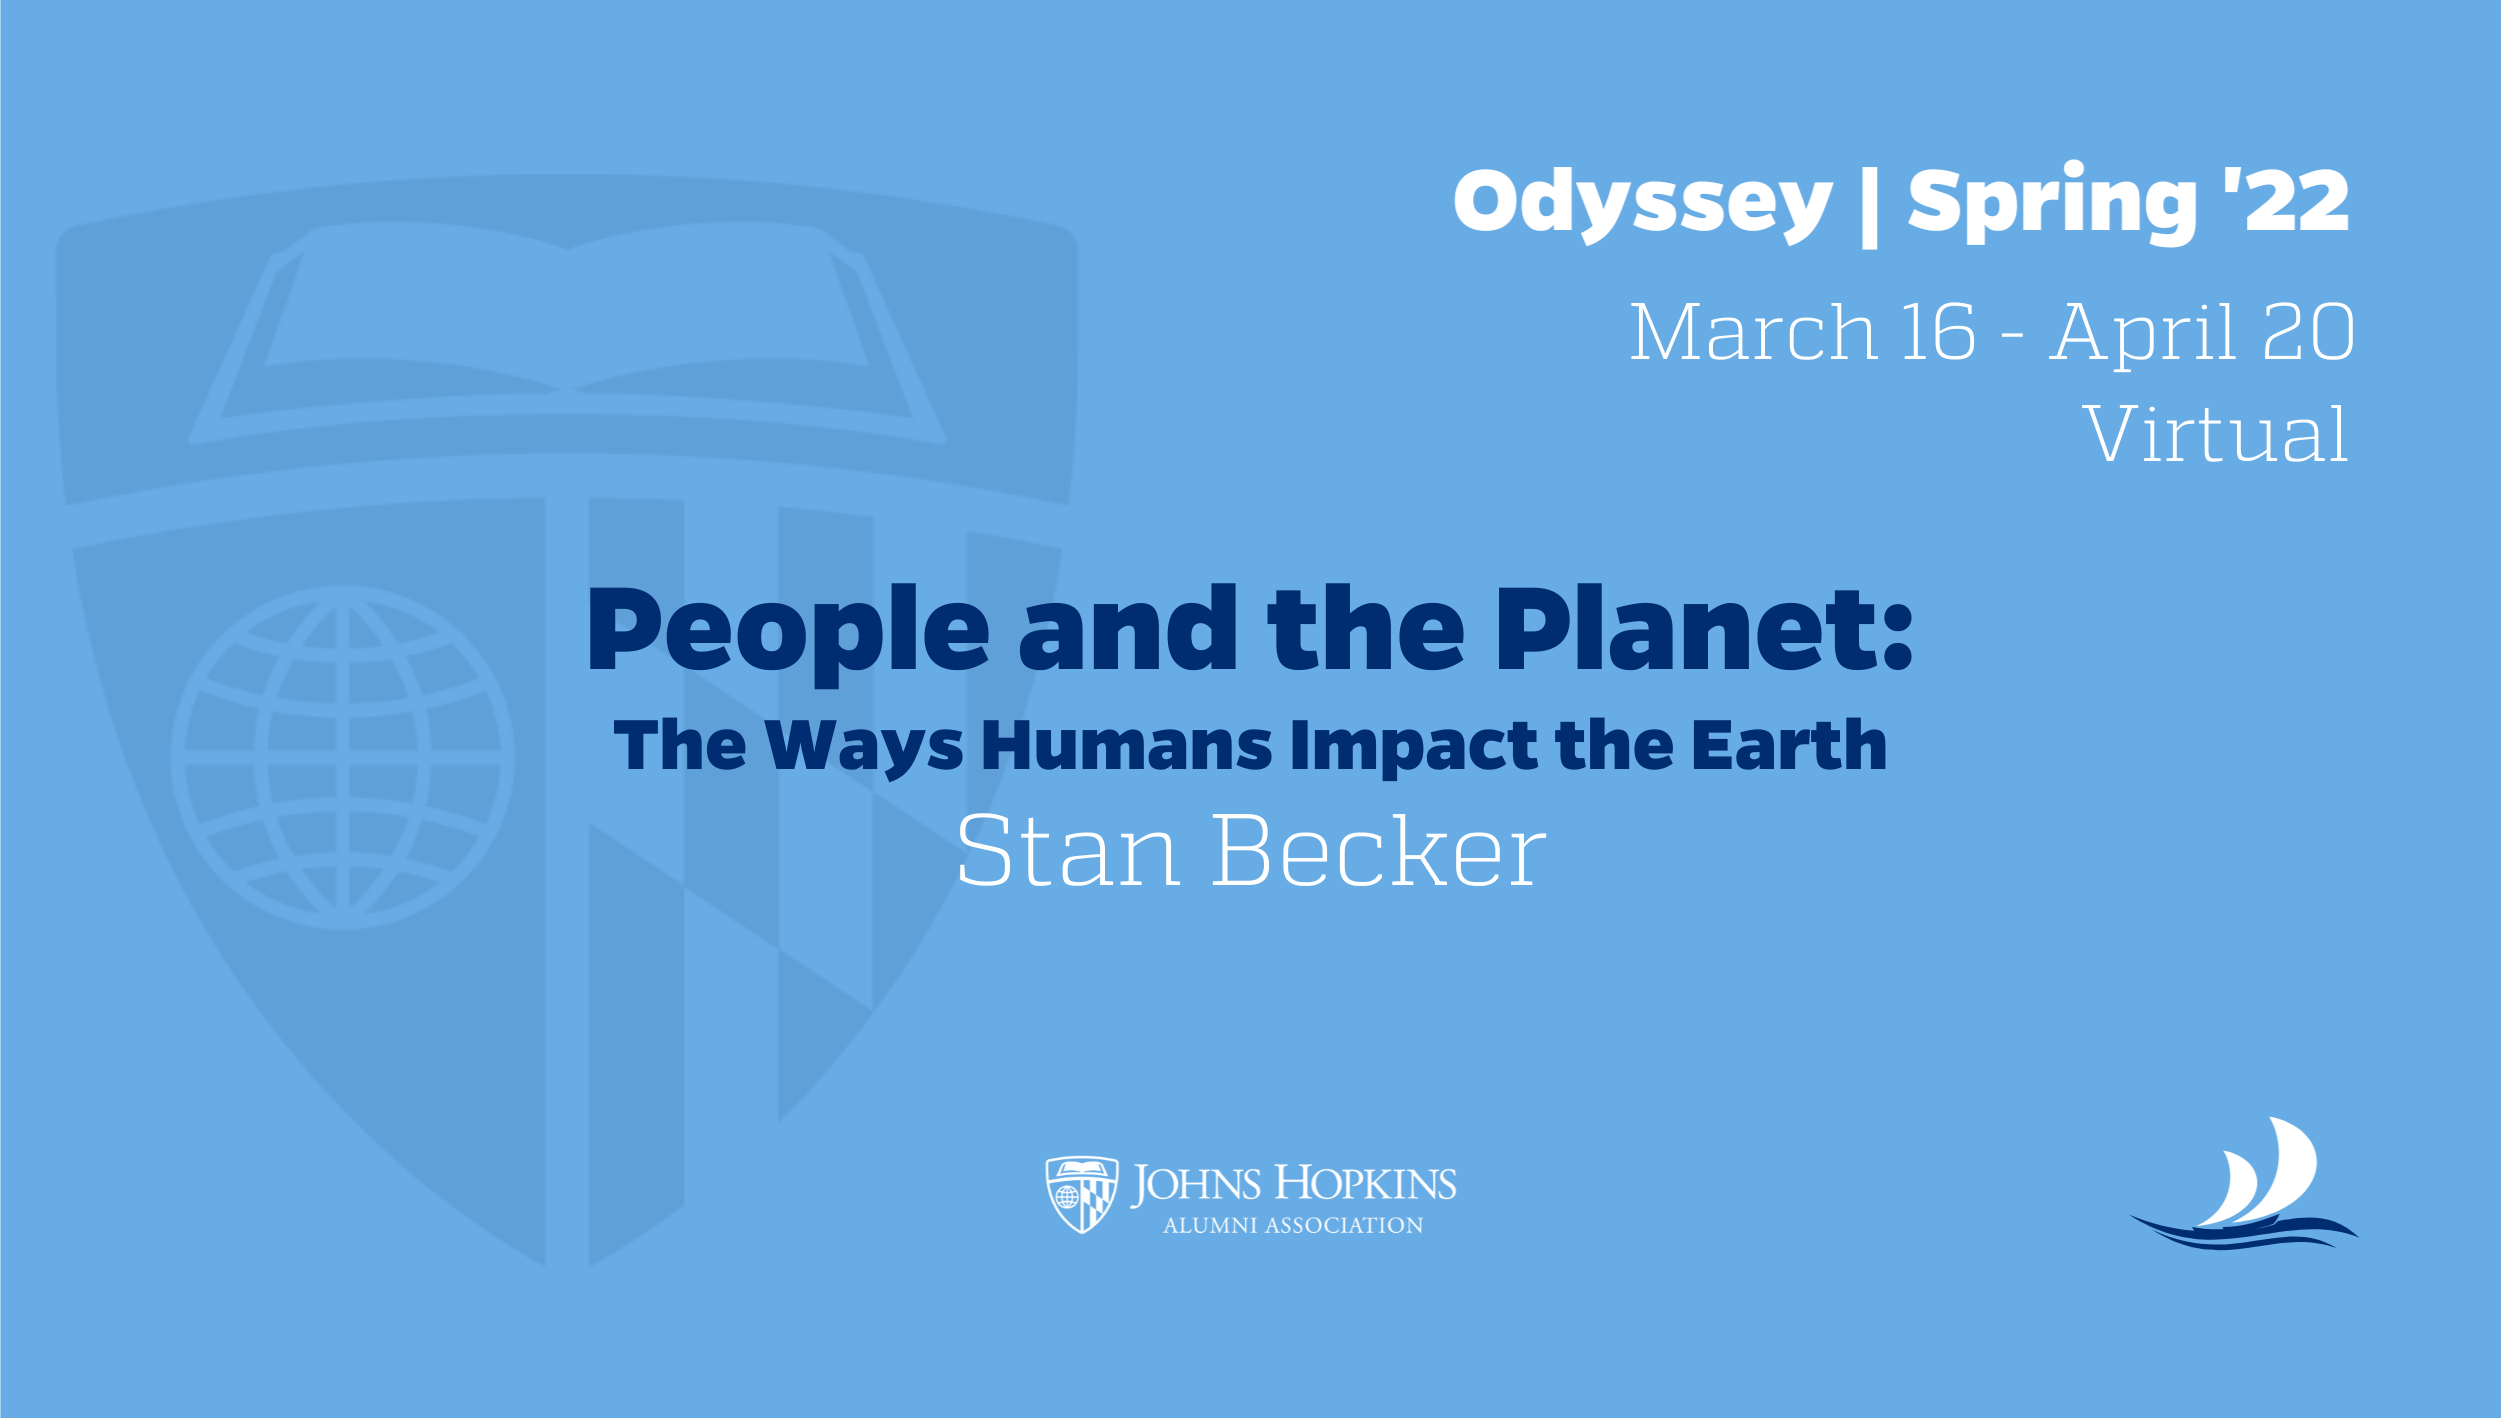 People and the Planet: The Ways Humans Impact the Earth